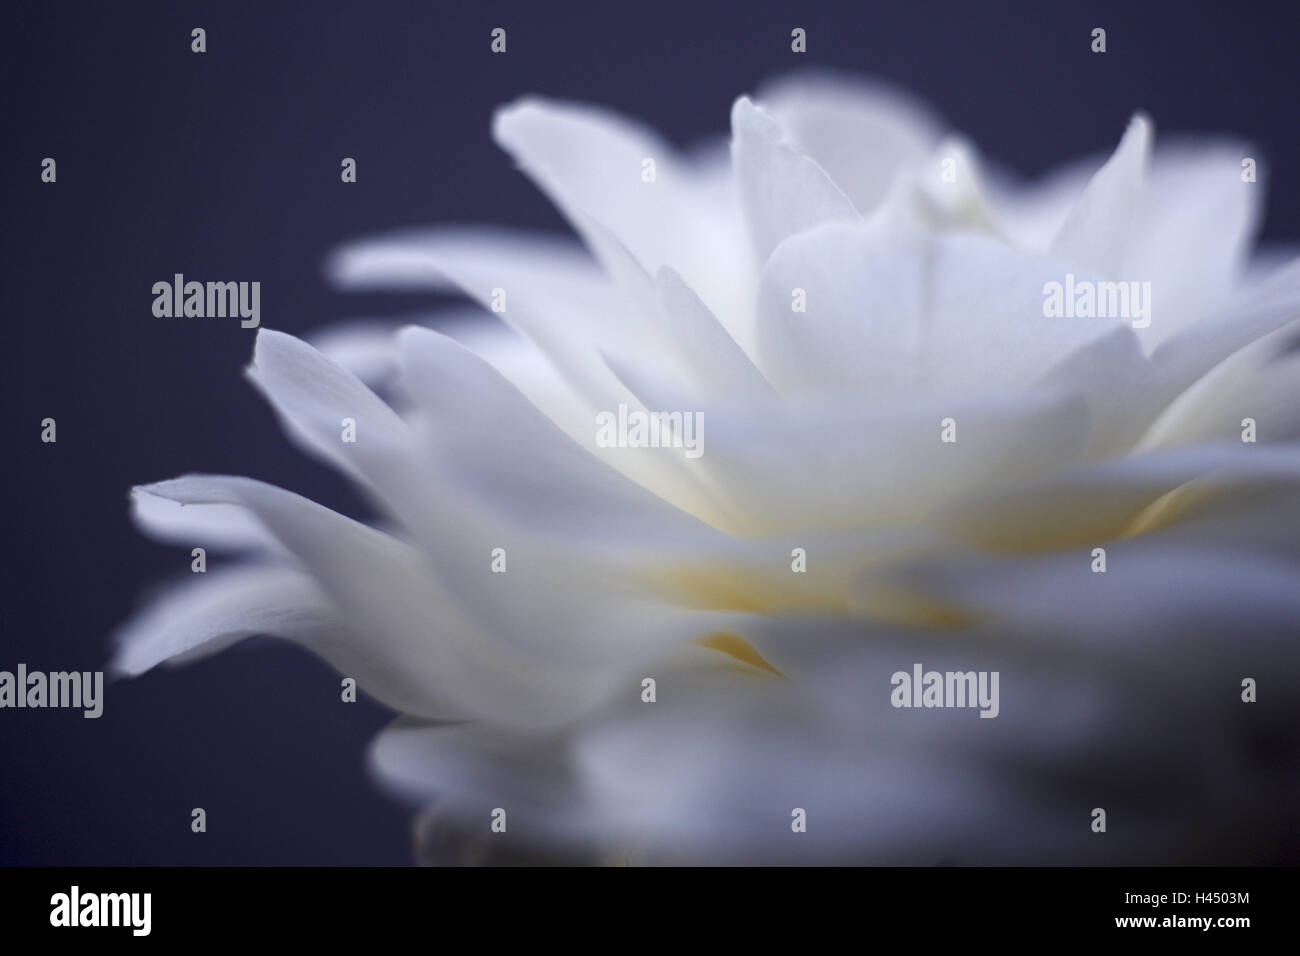 Japanese camellia, Camellia japonica, blossom, side view, medium close-up, camellia, flower blossom, flower, white, openly, ornamental plant, odour, icon, wellness, softly, cleanness, blur, Stock Photo